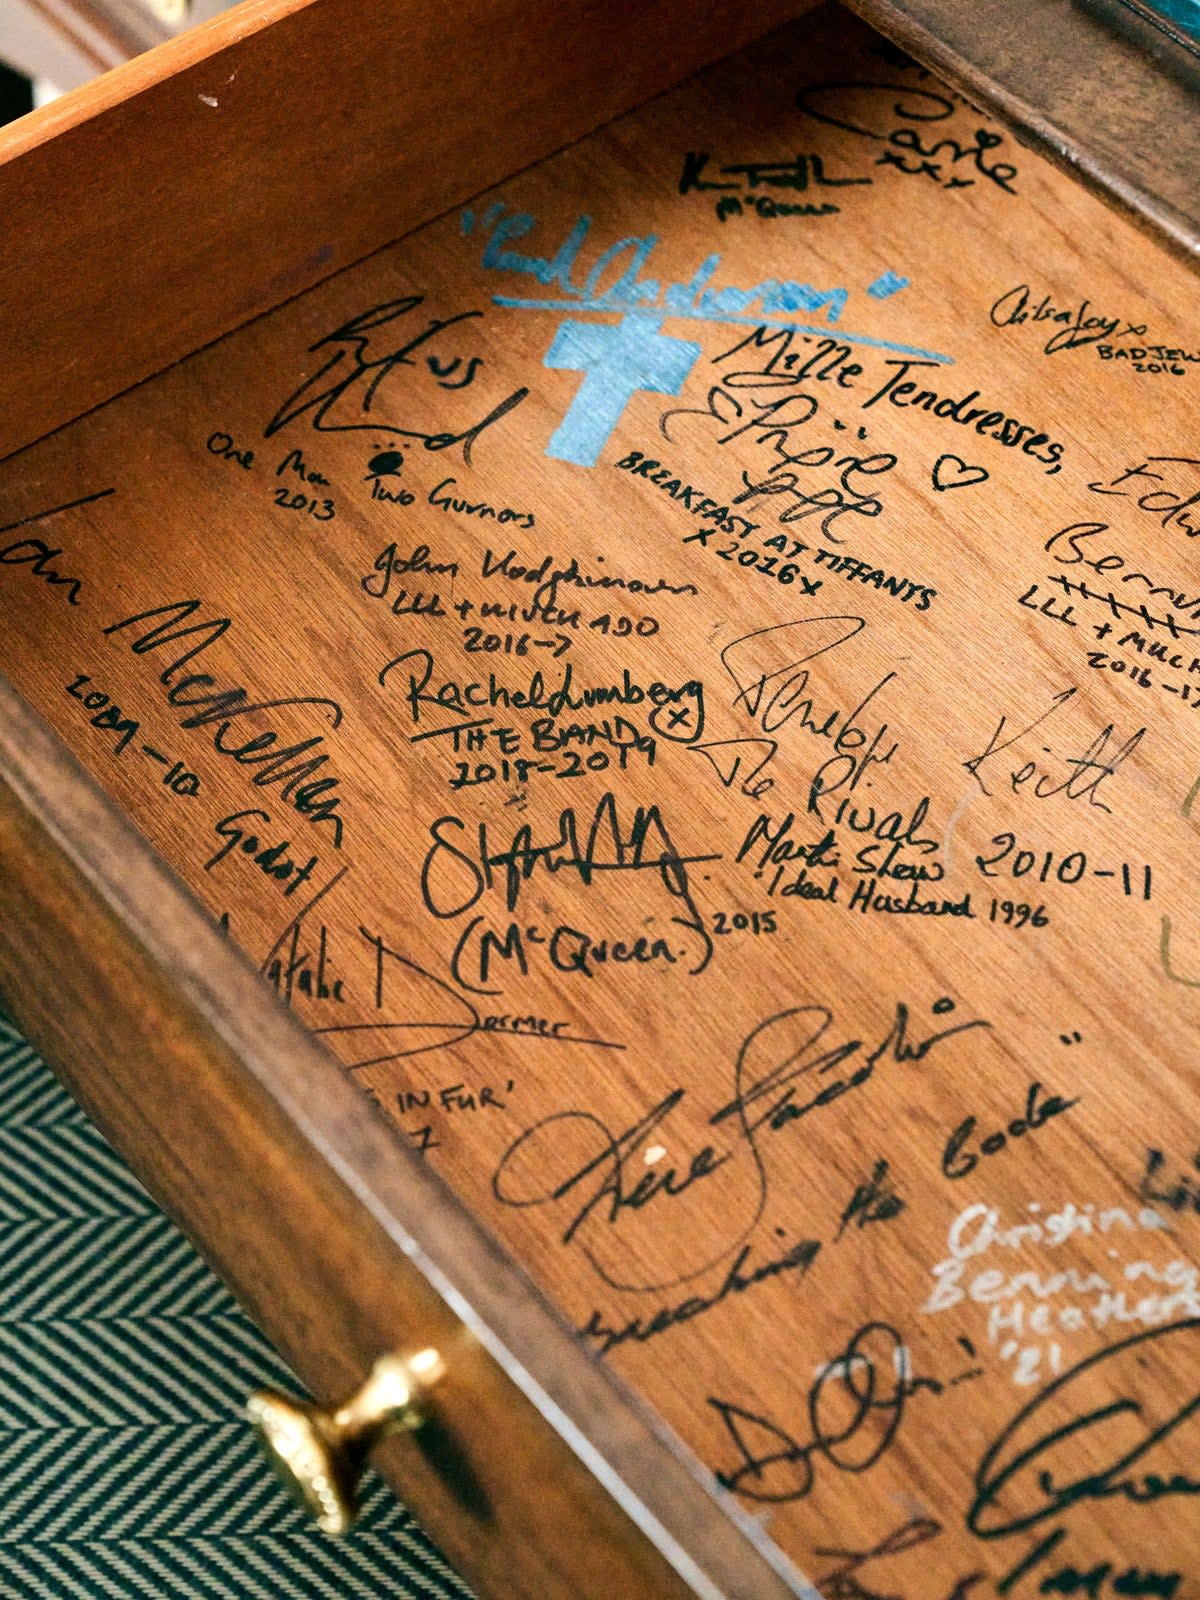 The drawer signed by stars, photo by Simon Brown (Courtesy of Theatre Royal Haymarket and Kit Kemp Design Studio)